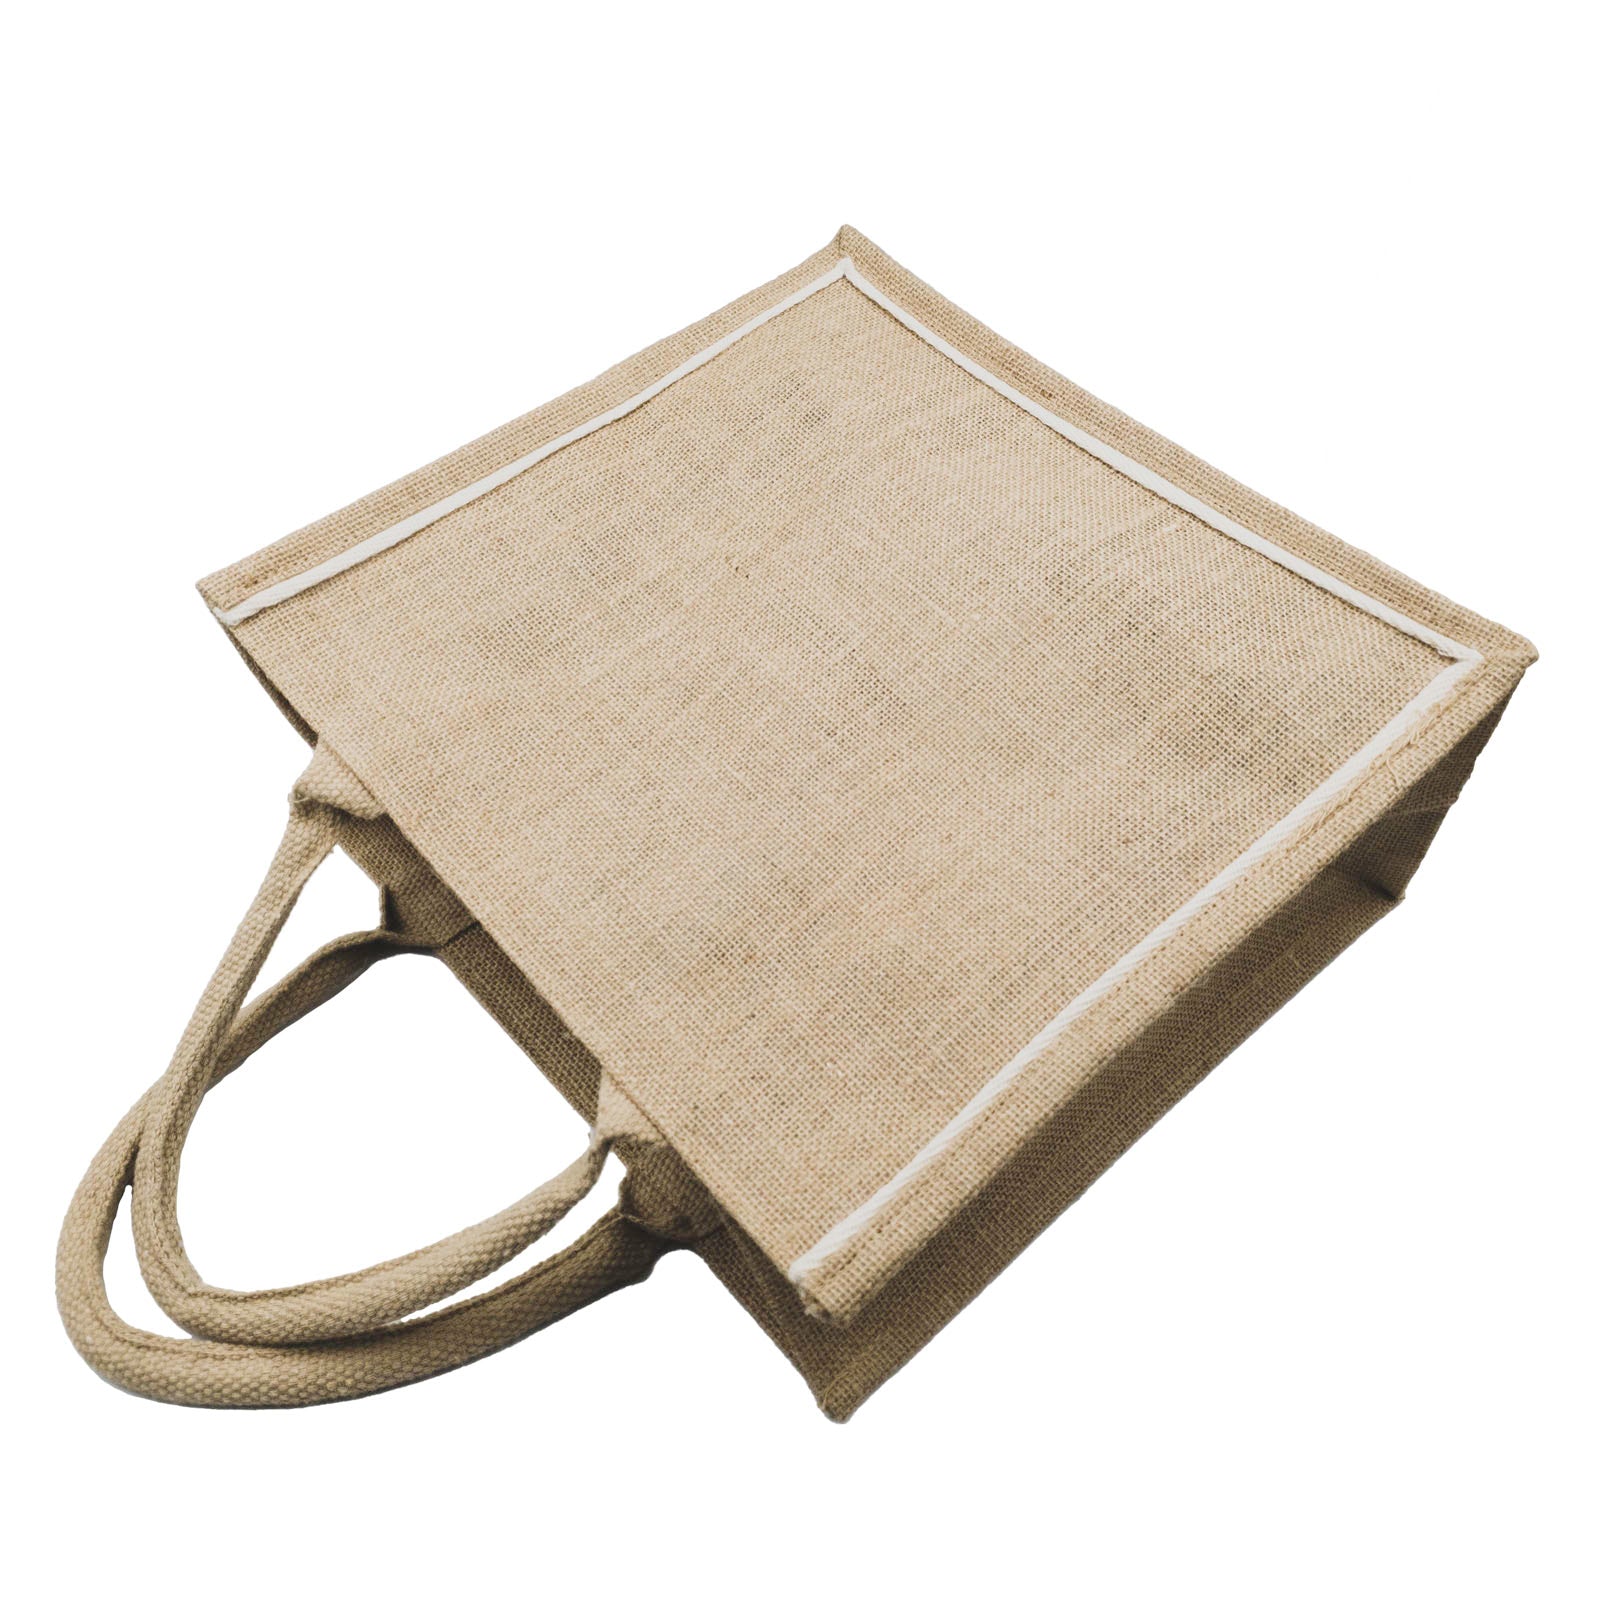 Jute Bag with White Lining